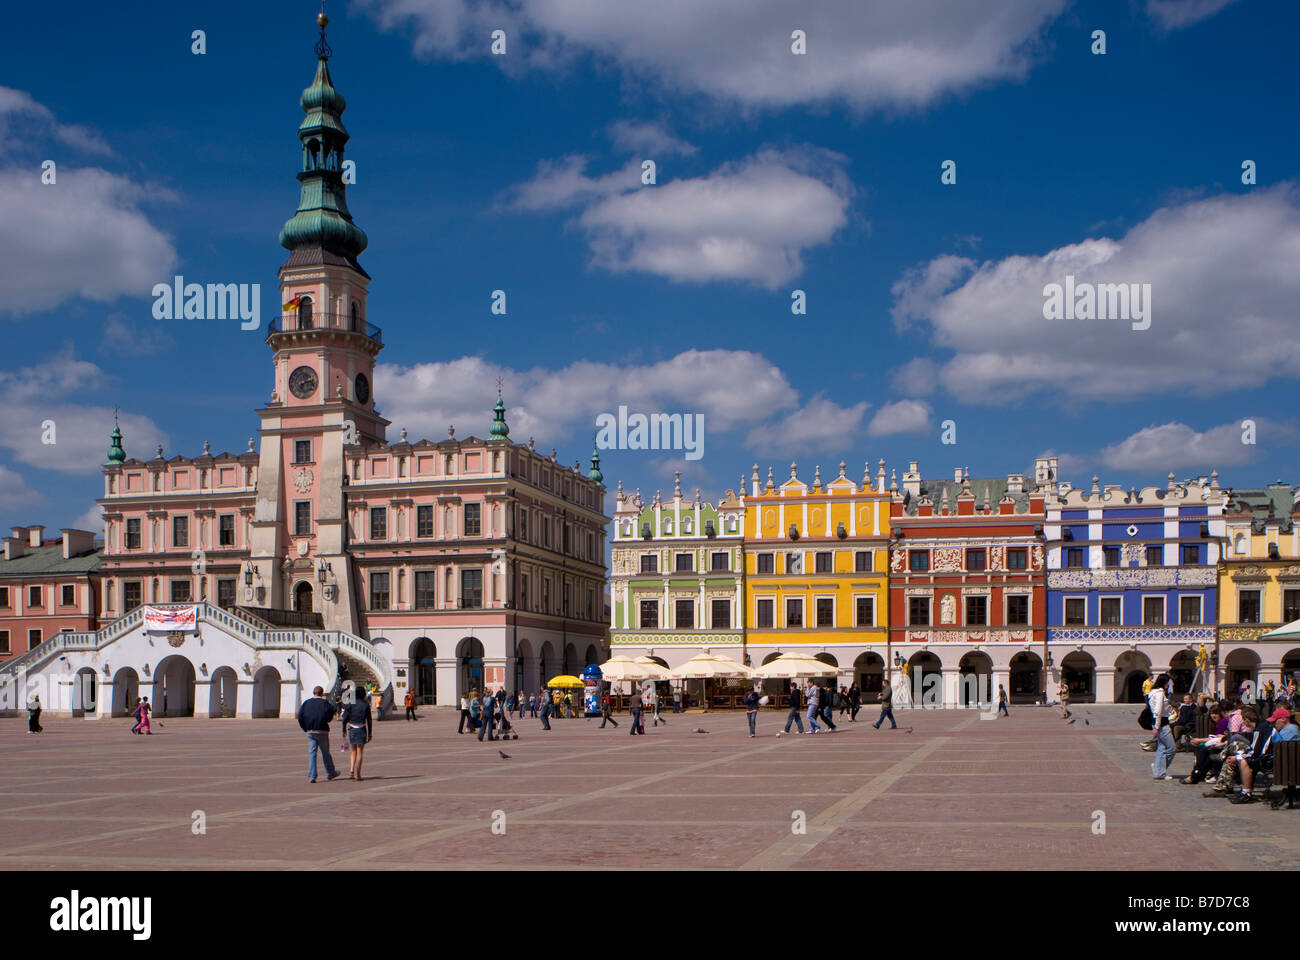 Town Hall And Architecture On Marketplace, Old Town, Zamosc, Poland Stock Photo